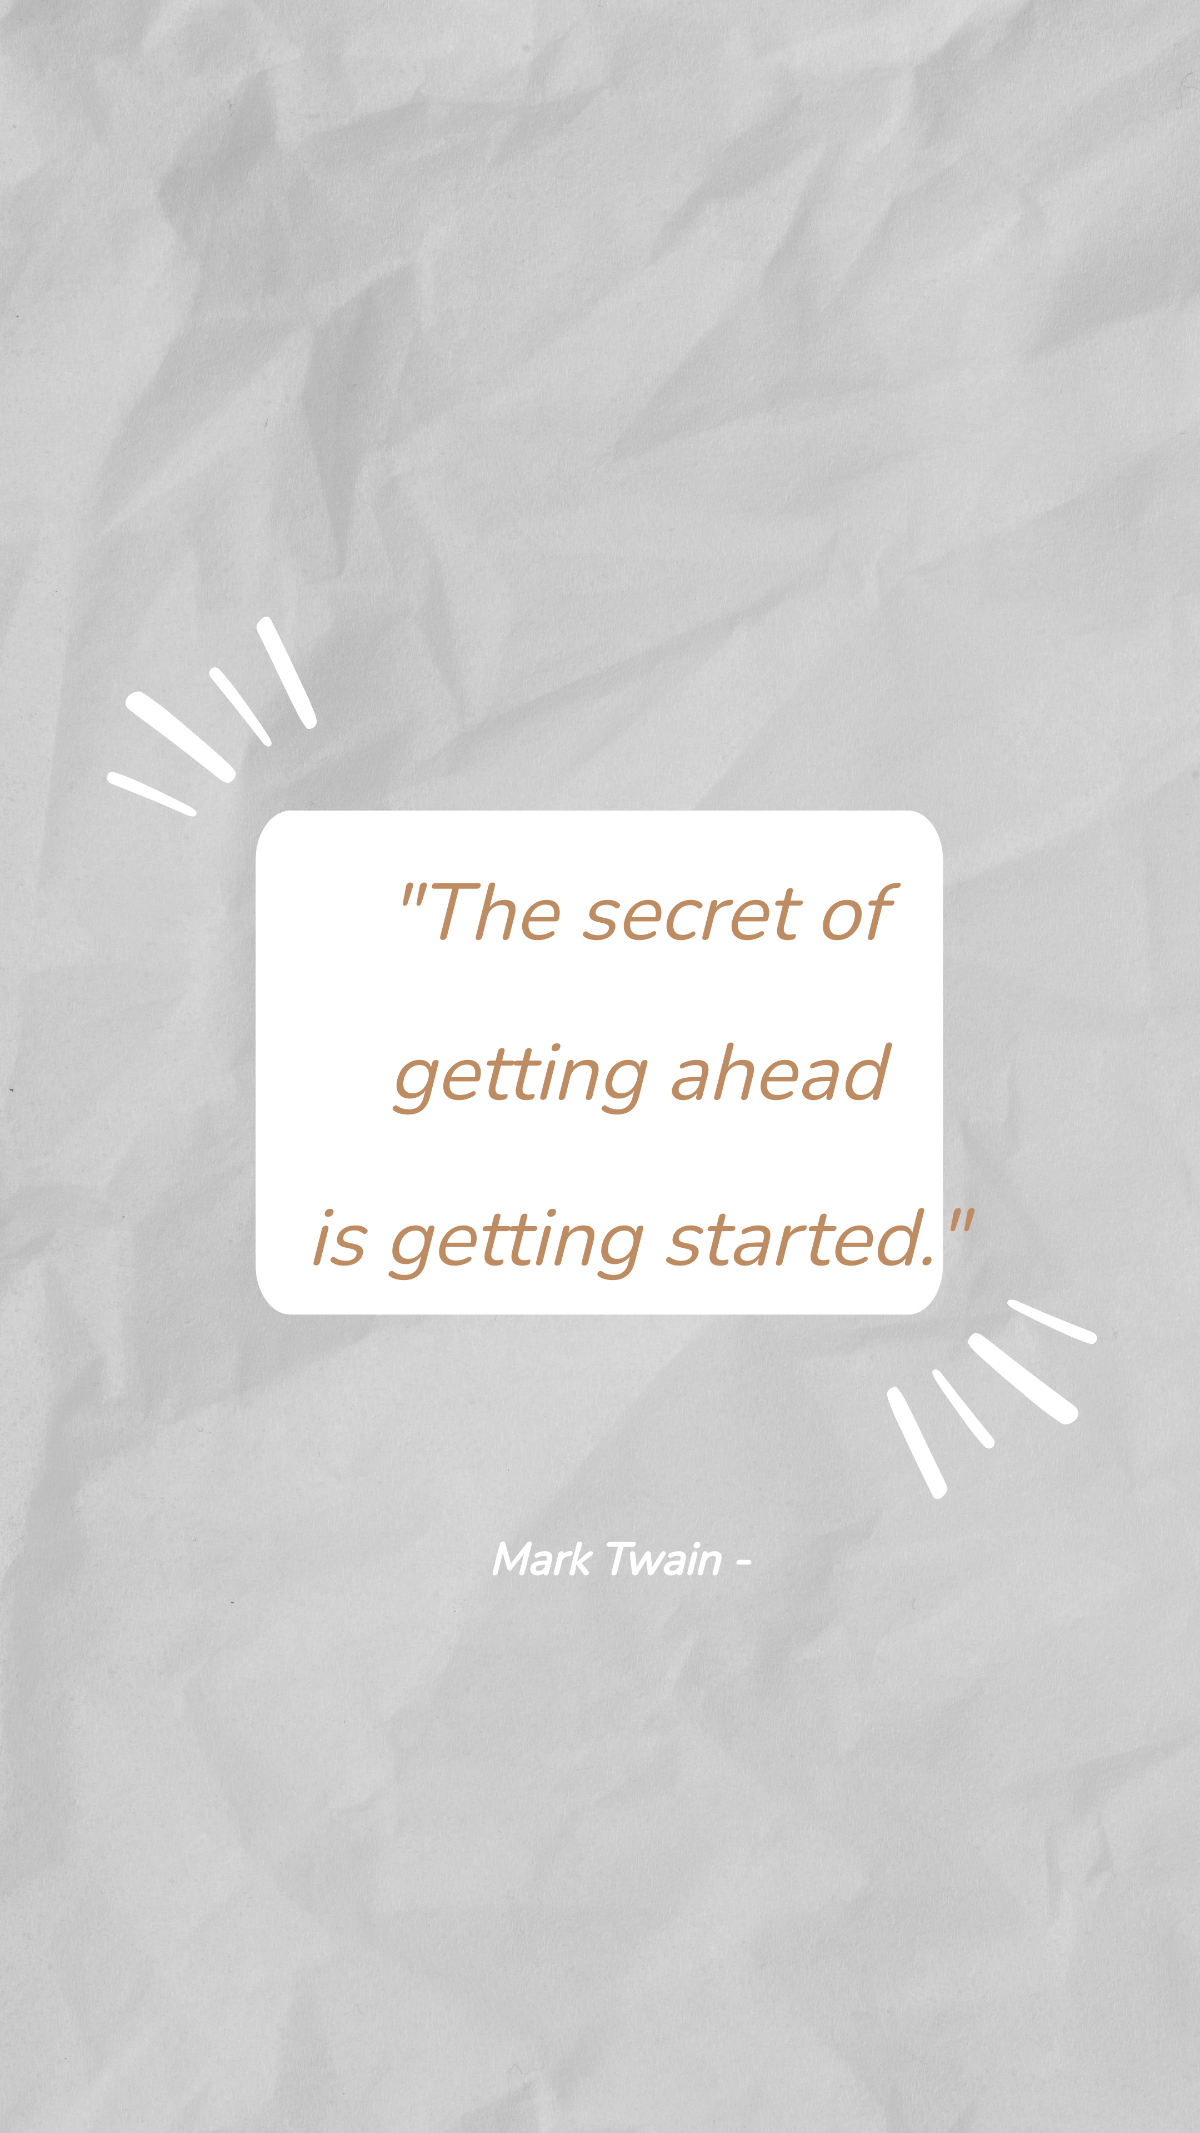 Mark Twain - The secret of getting ahead is getting started.